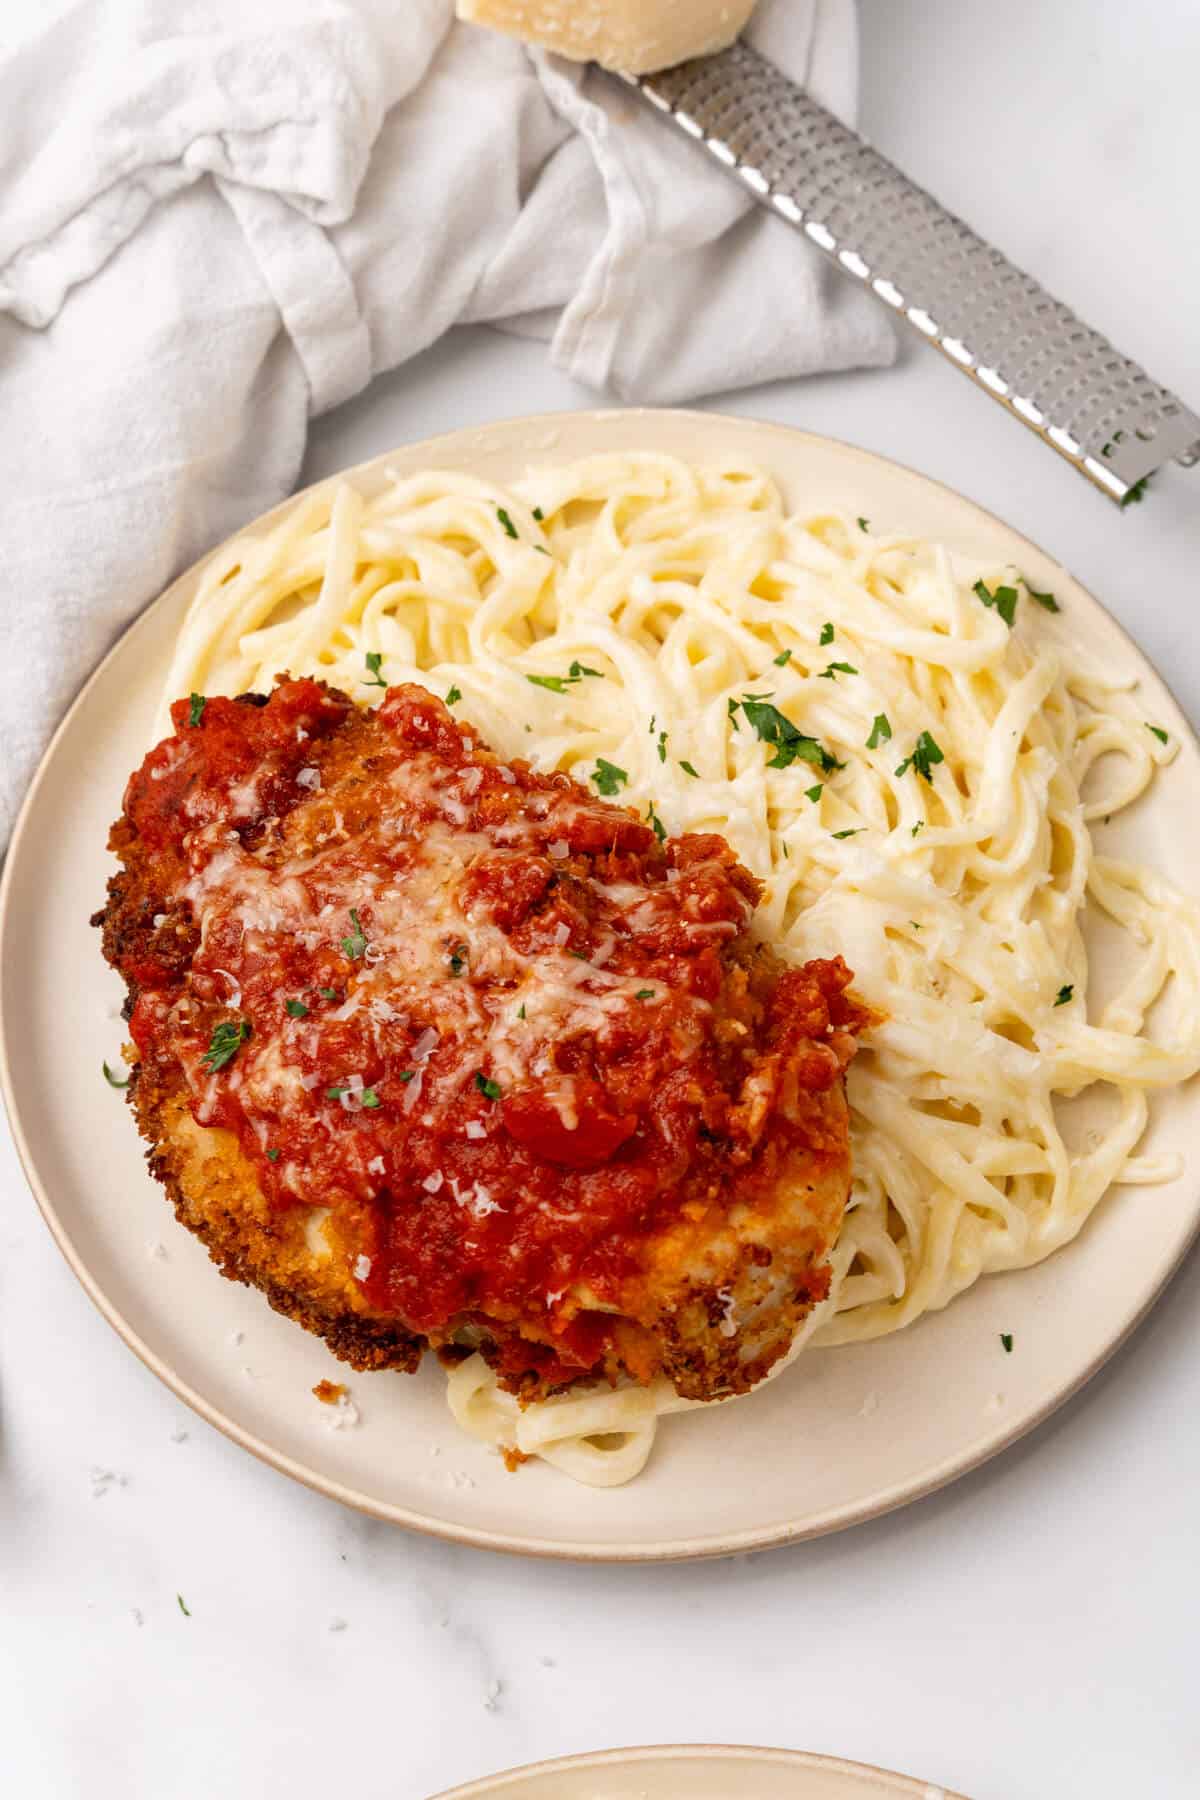 A plate of spaghetti topped with a breaded chicken cutlet and Alfredo sauce, garnished with grated cheese and parsley.